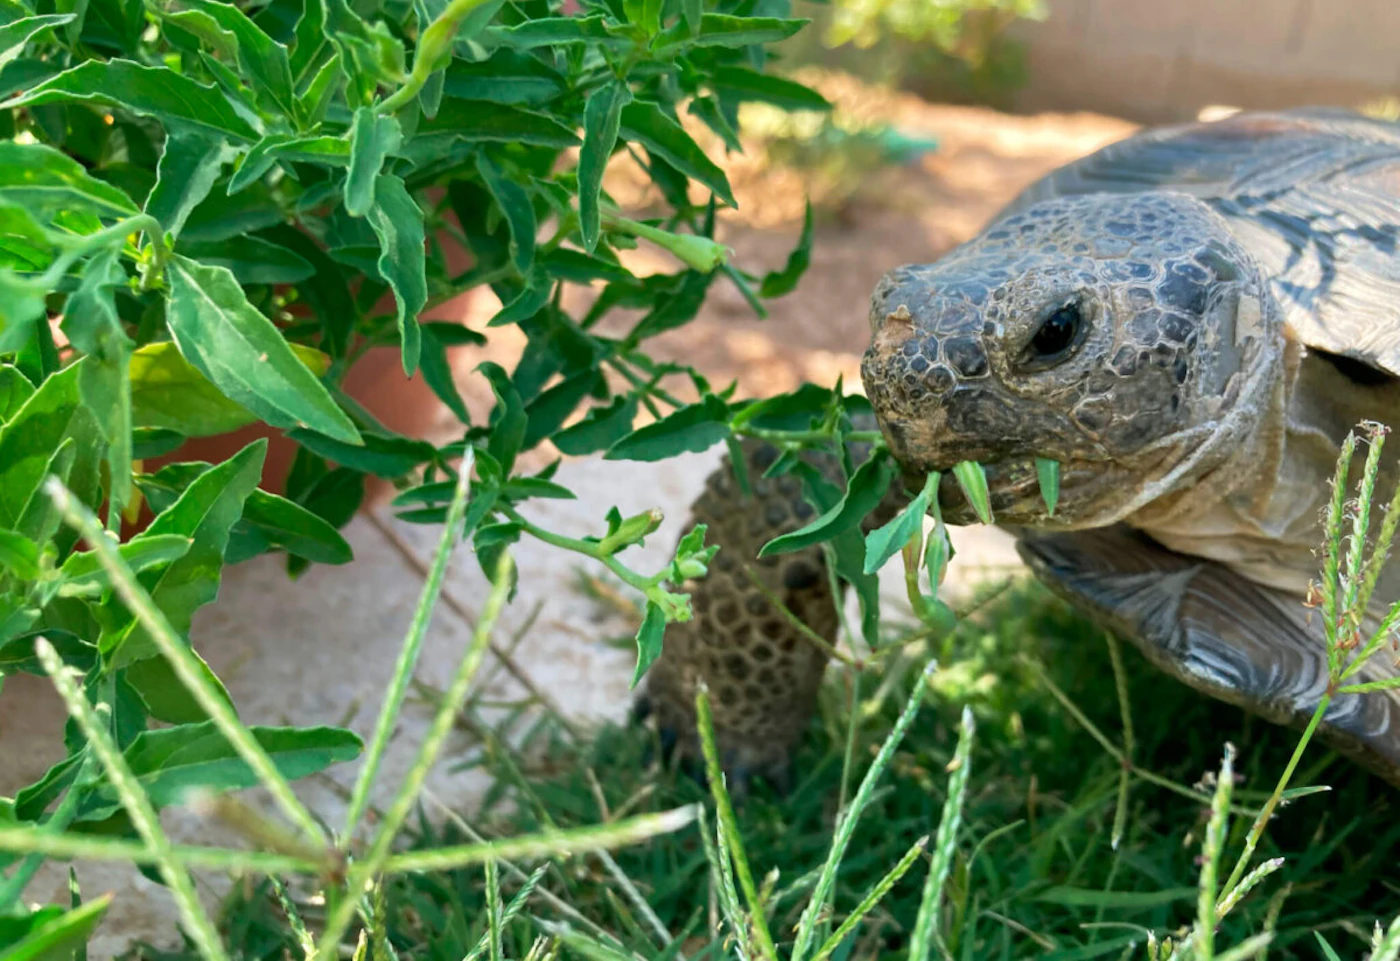 Dotty the desert tortoise chows down on evening primrose in Scottsdale, Ariz., on May 11, 2023. The surprising warmth of these ancient cold-blooded creatures has made them popular pets for families with pet dander allergies and for retirees. (AP Photo/Alina Hartounian)